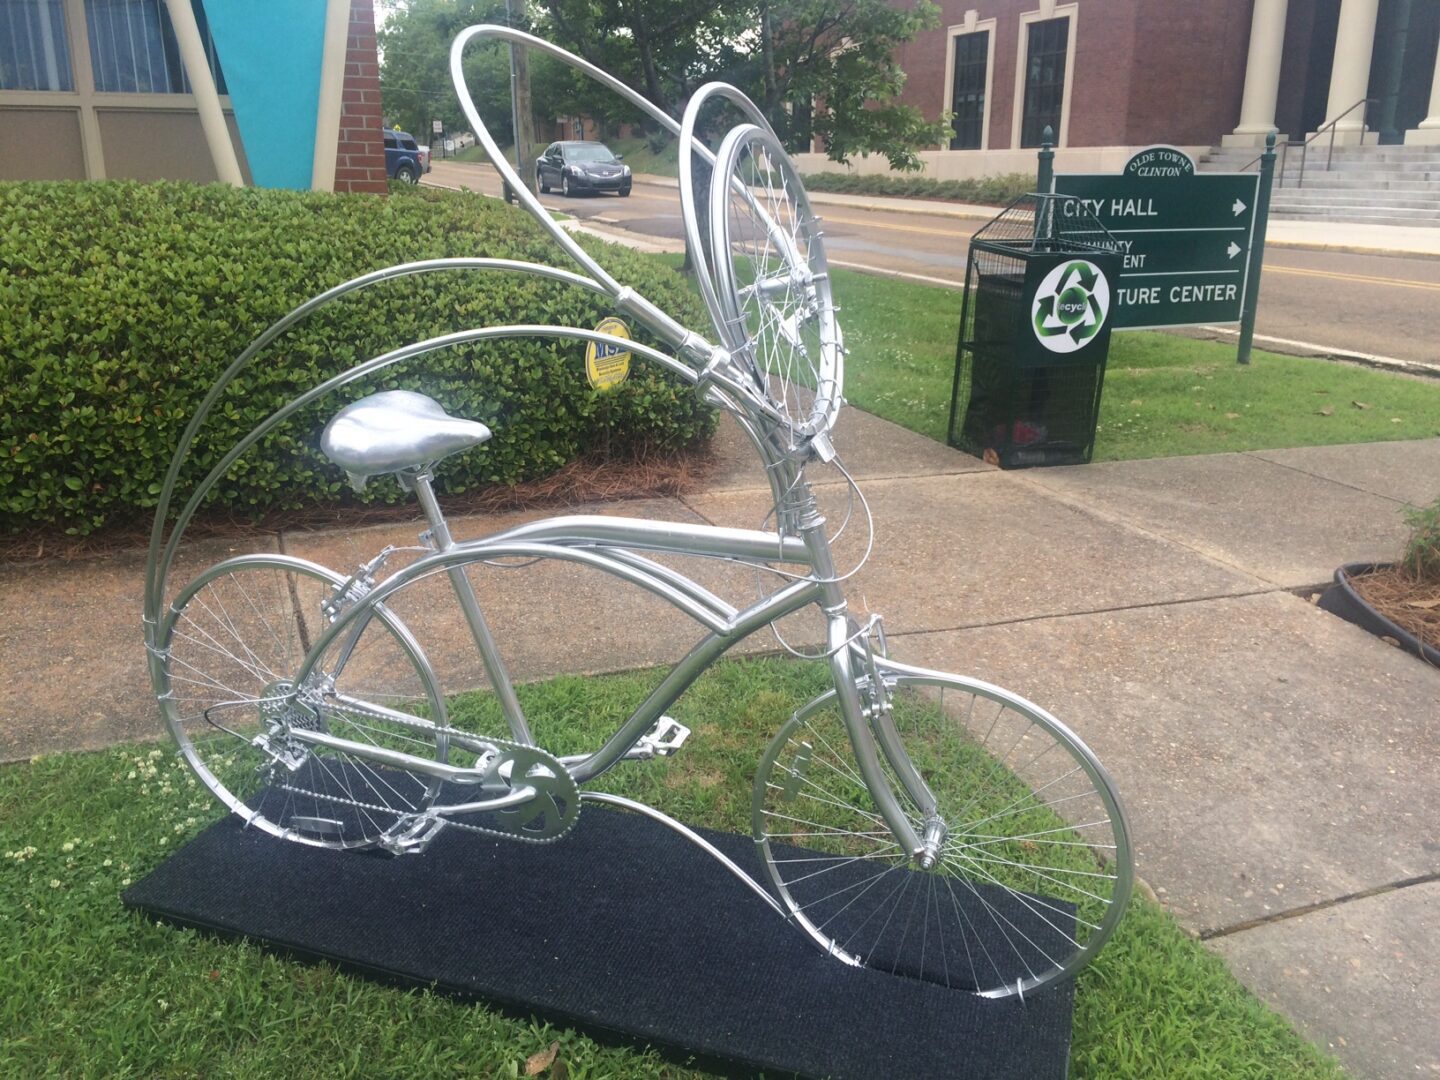 A bicycle sculpture is on display in the grass.